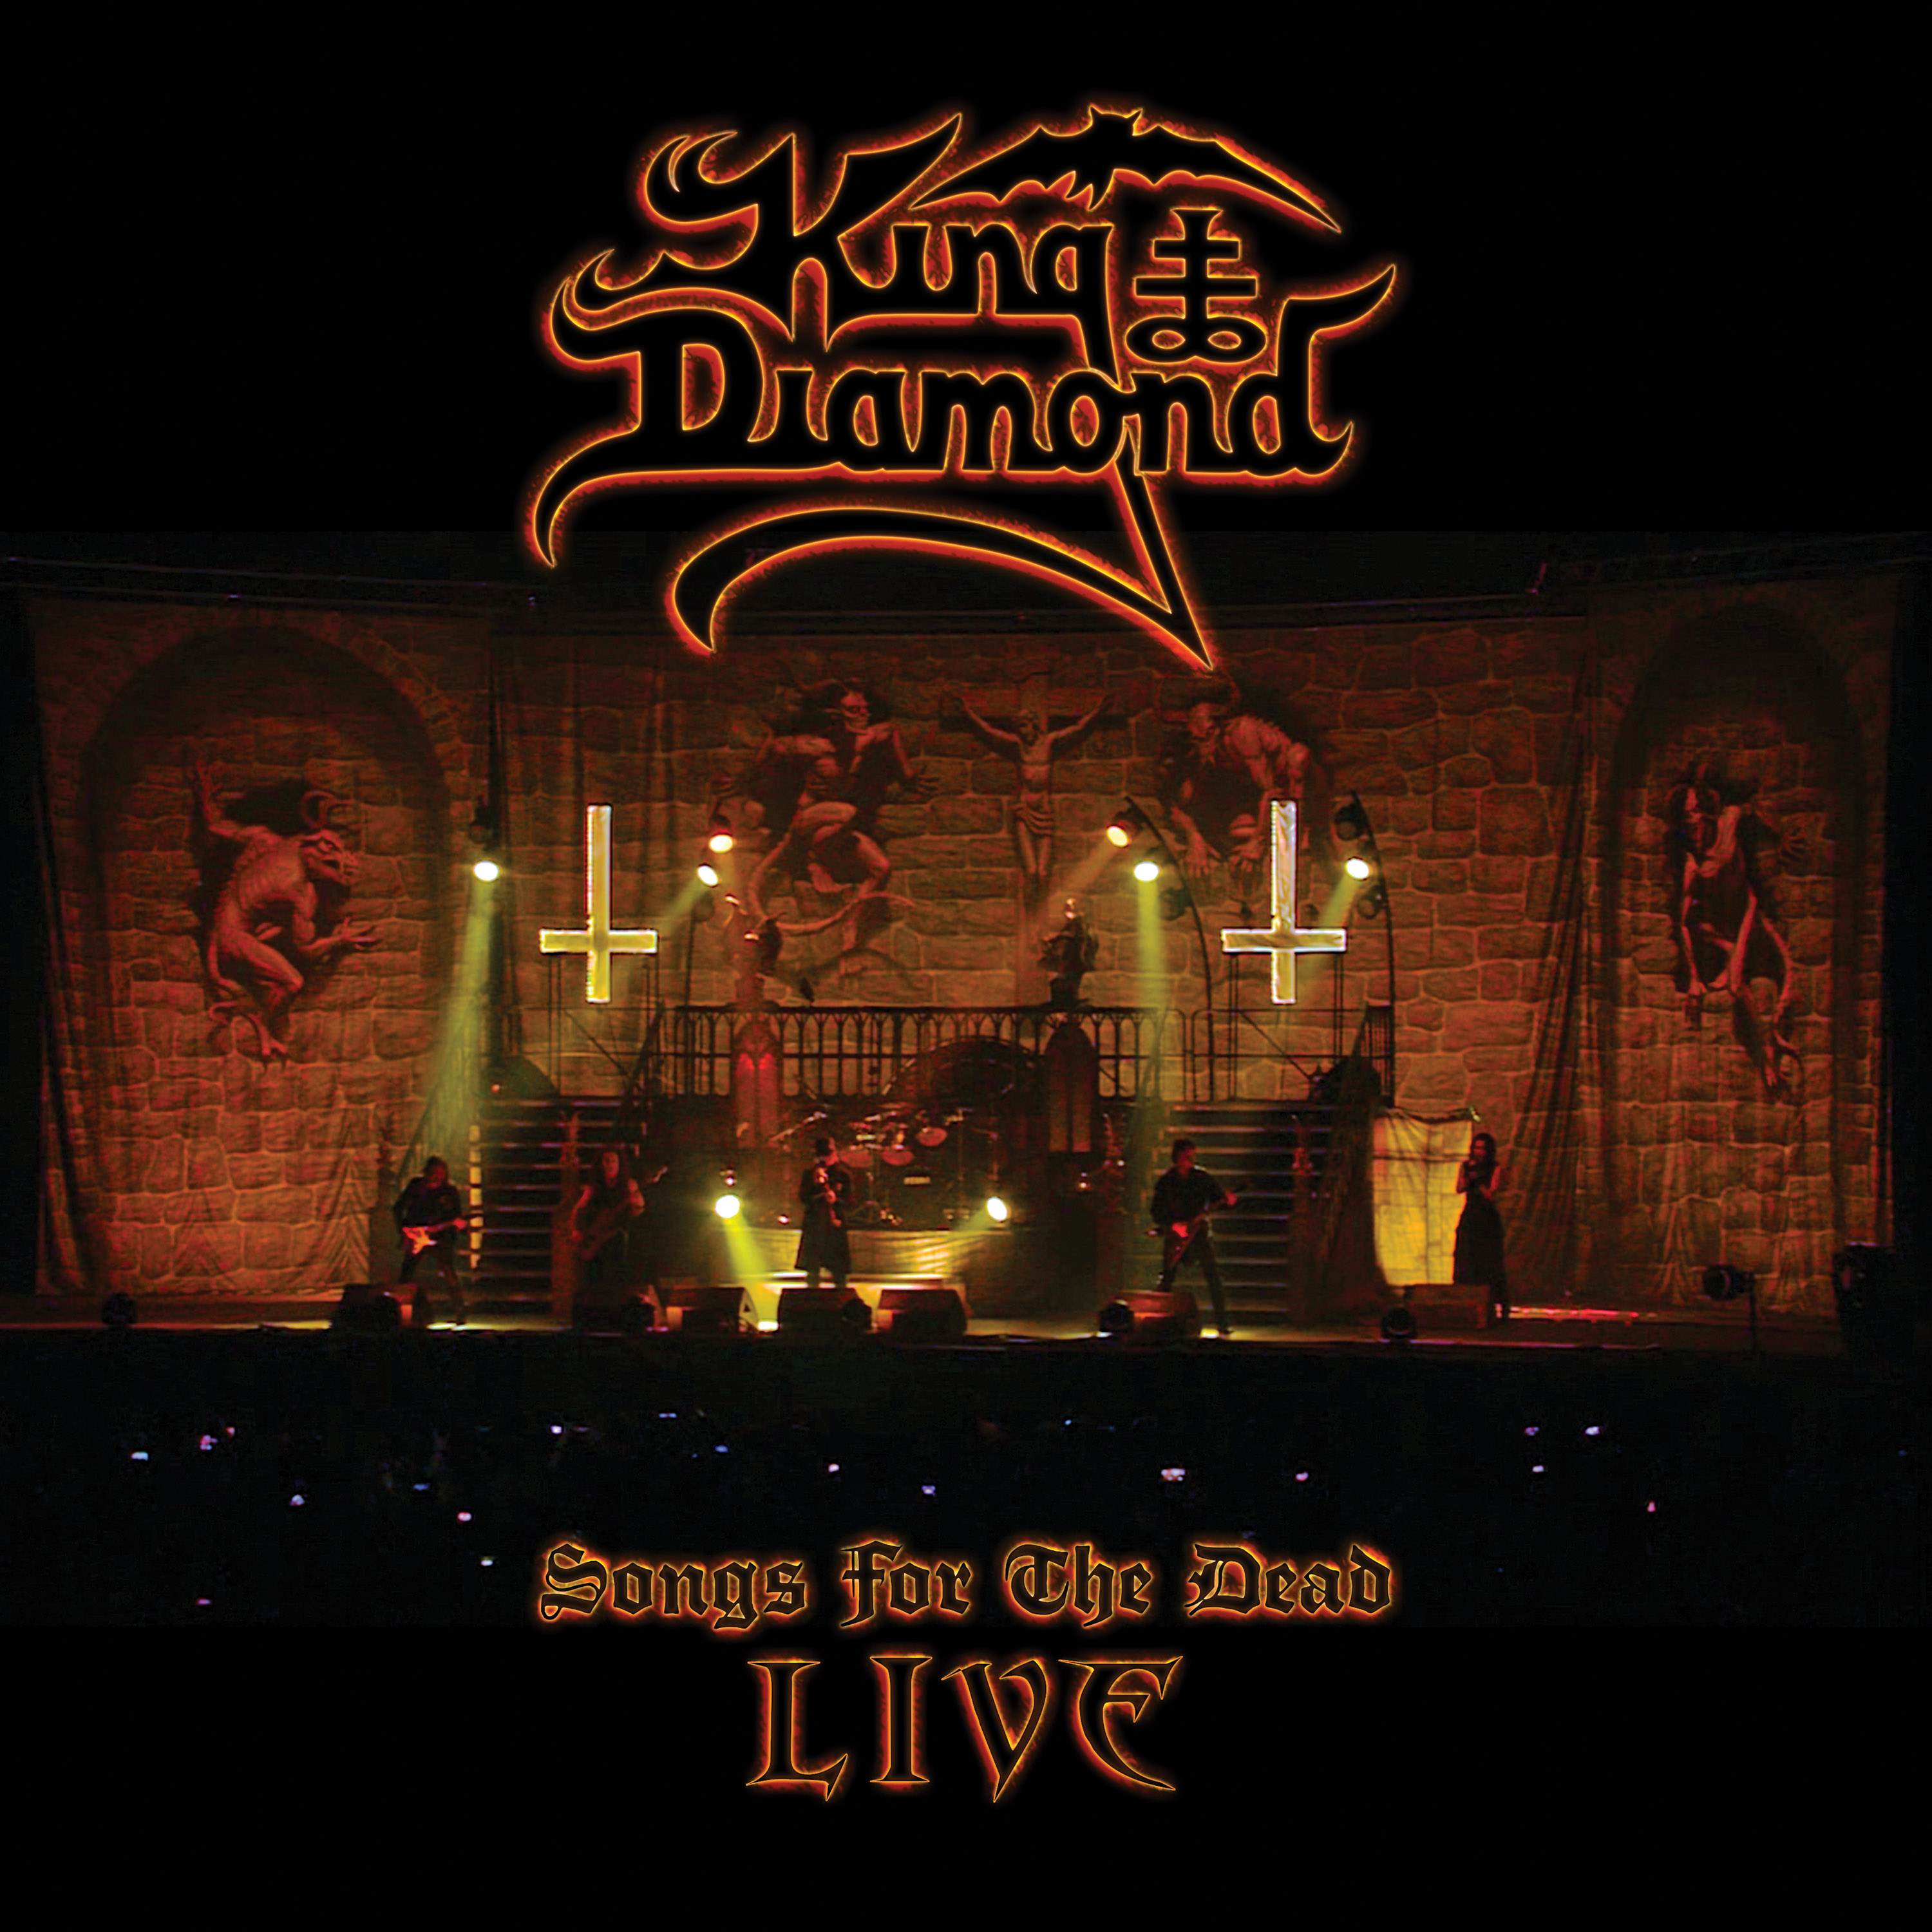 King Diamond shines so brilliantly on new ‘Songs for the Dead Live’ release